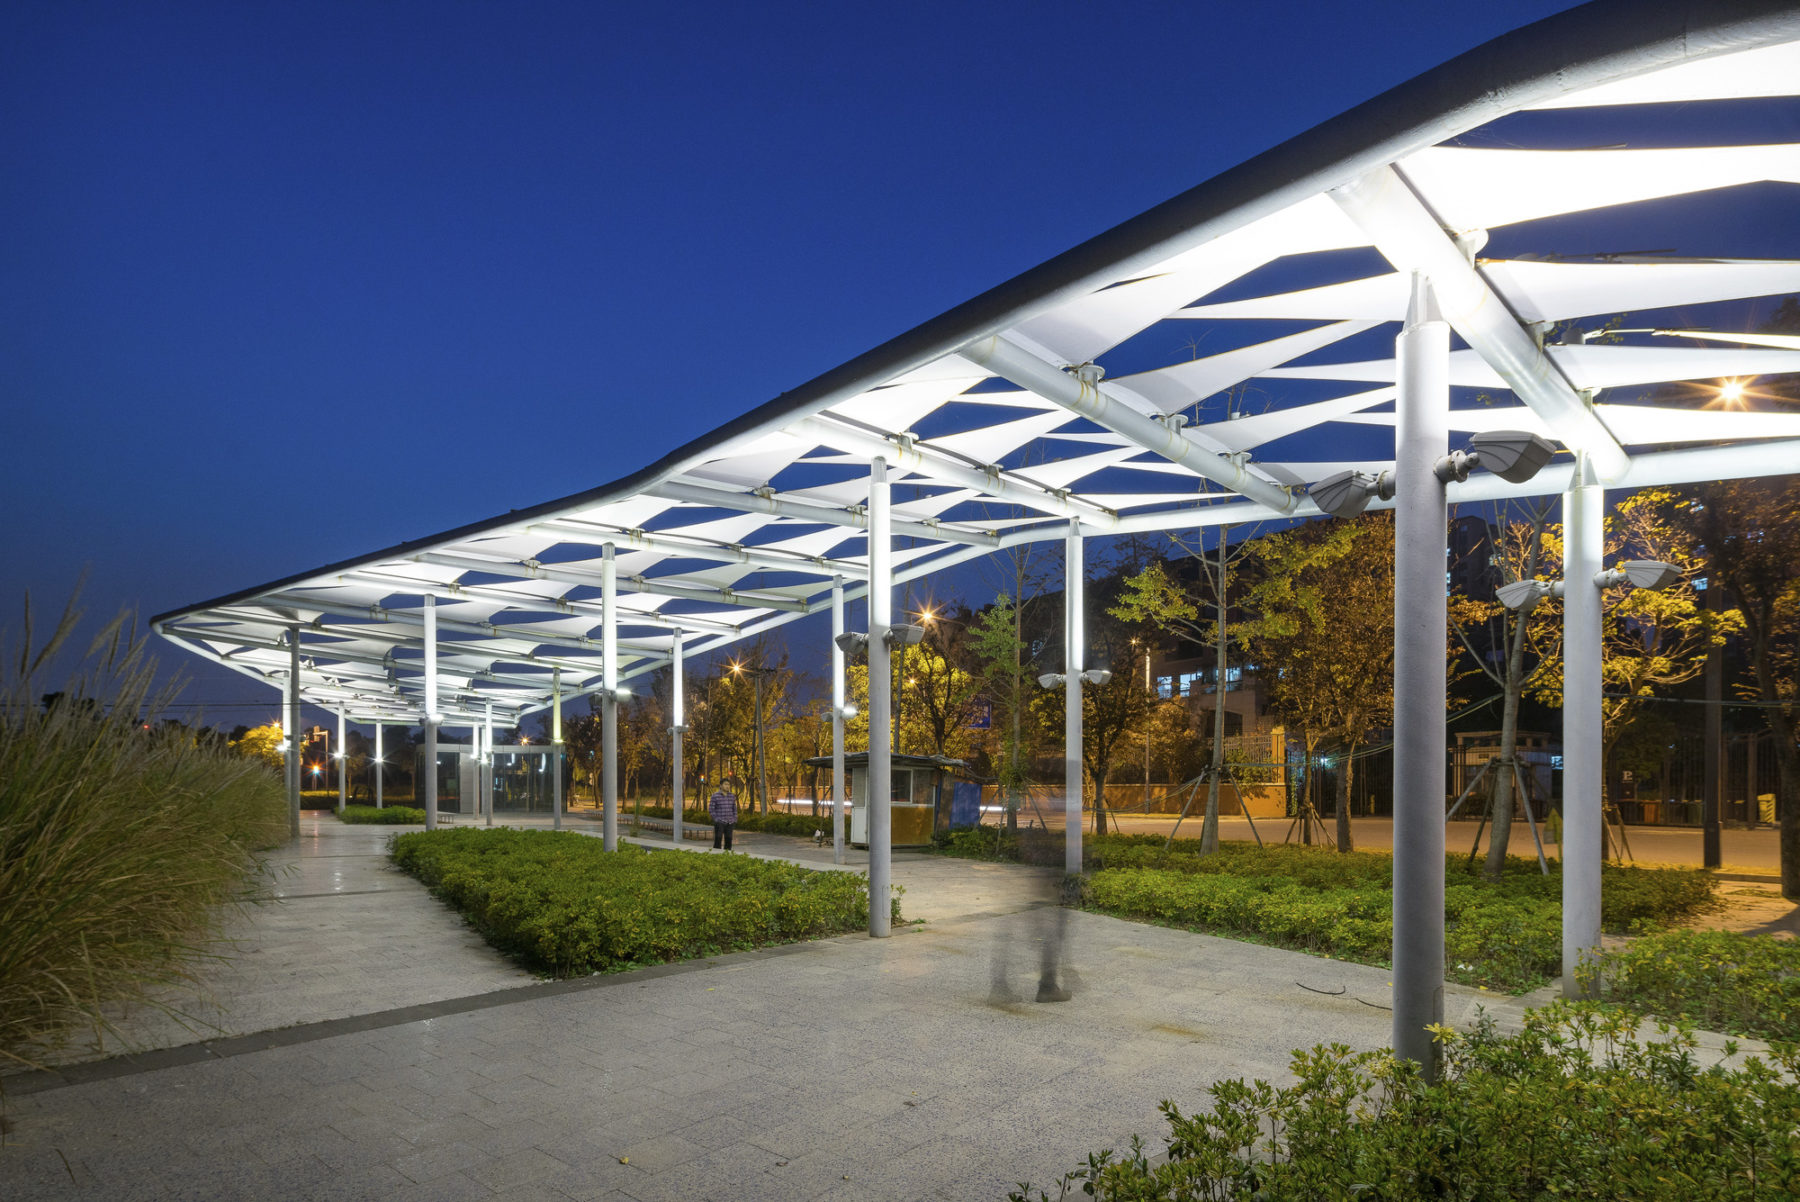 photograph of canopy in park at night